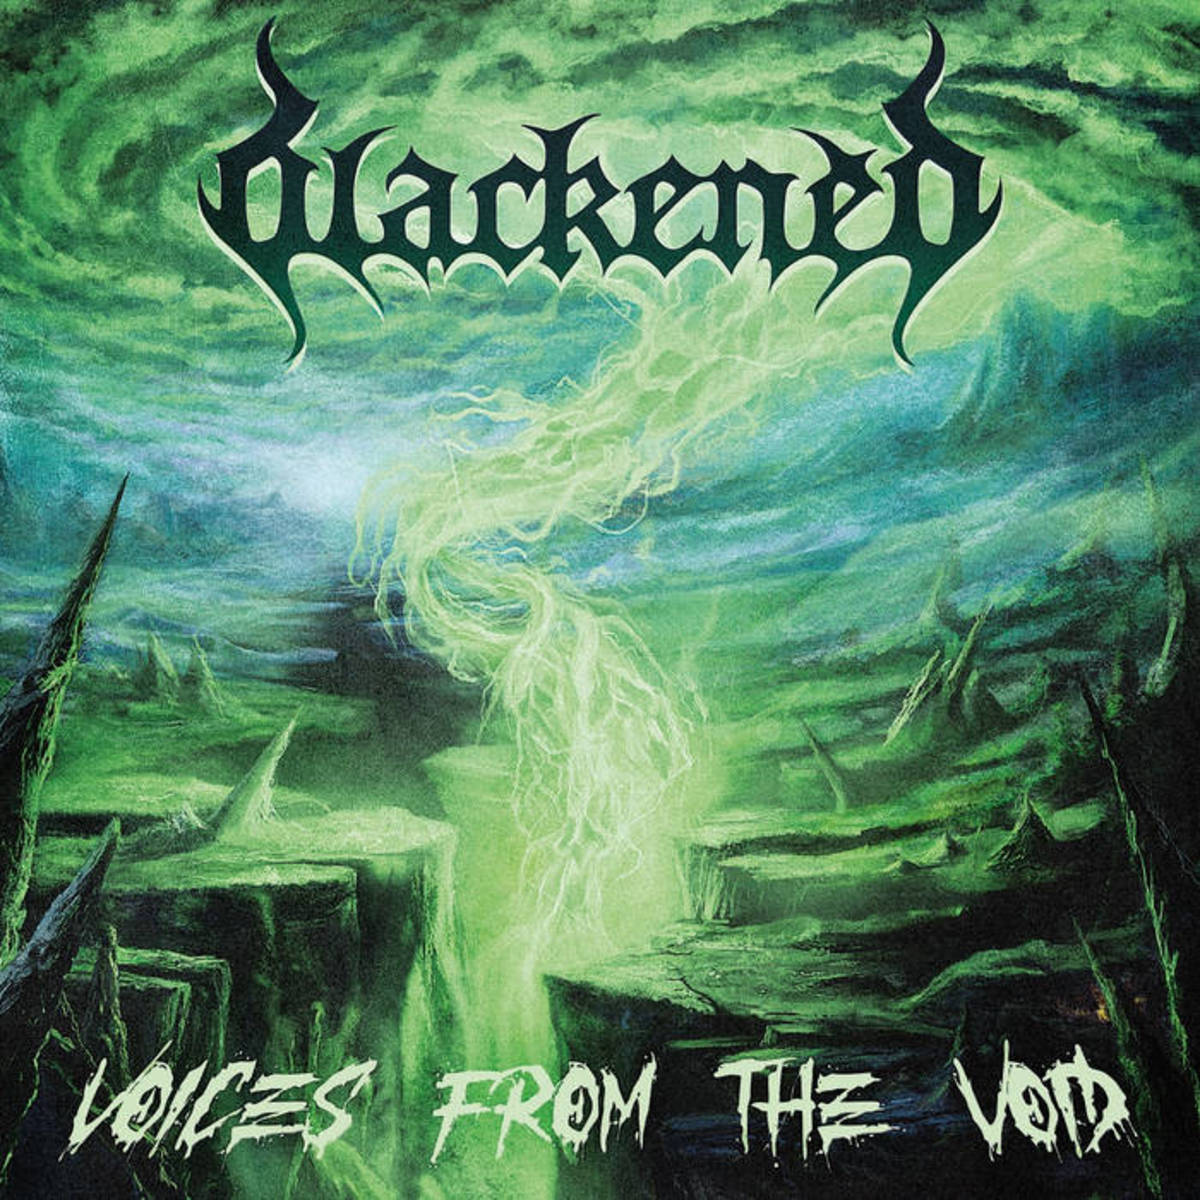 review-of-the-album-voices-from-the-void-by-blackened-a-very-good-french-death-and-thrash-metal-band